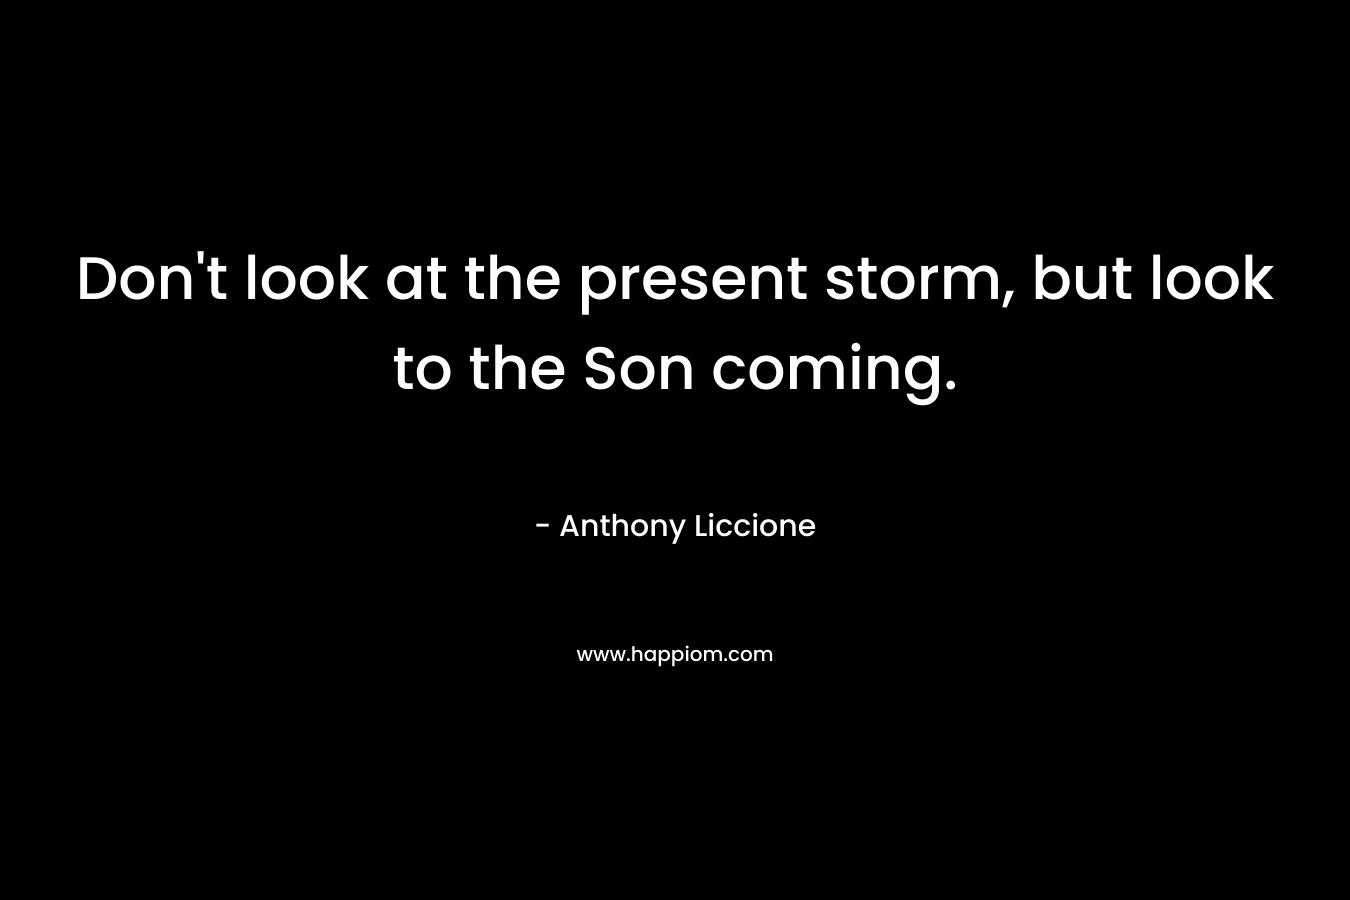 Don't look at the present storm, but look to the Son coming.